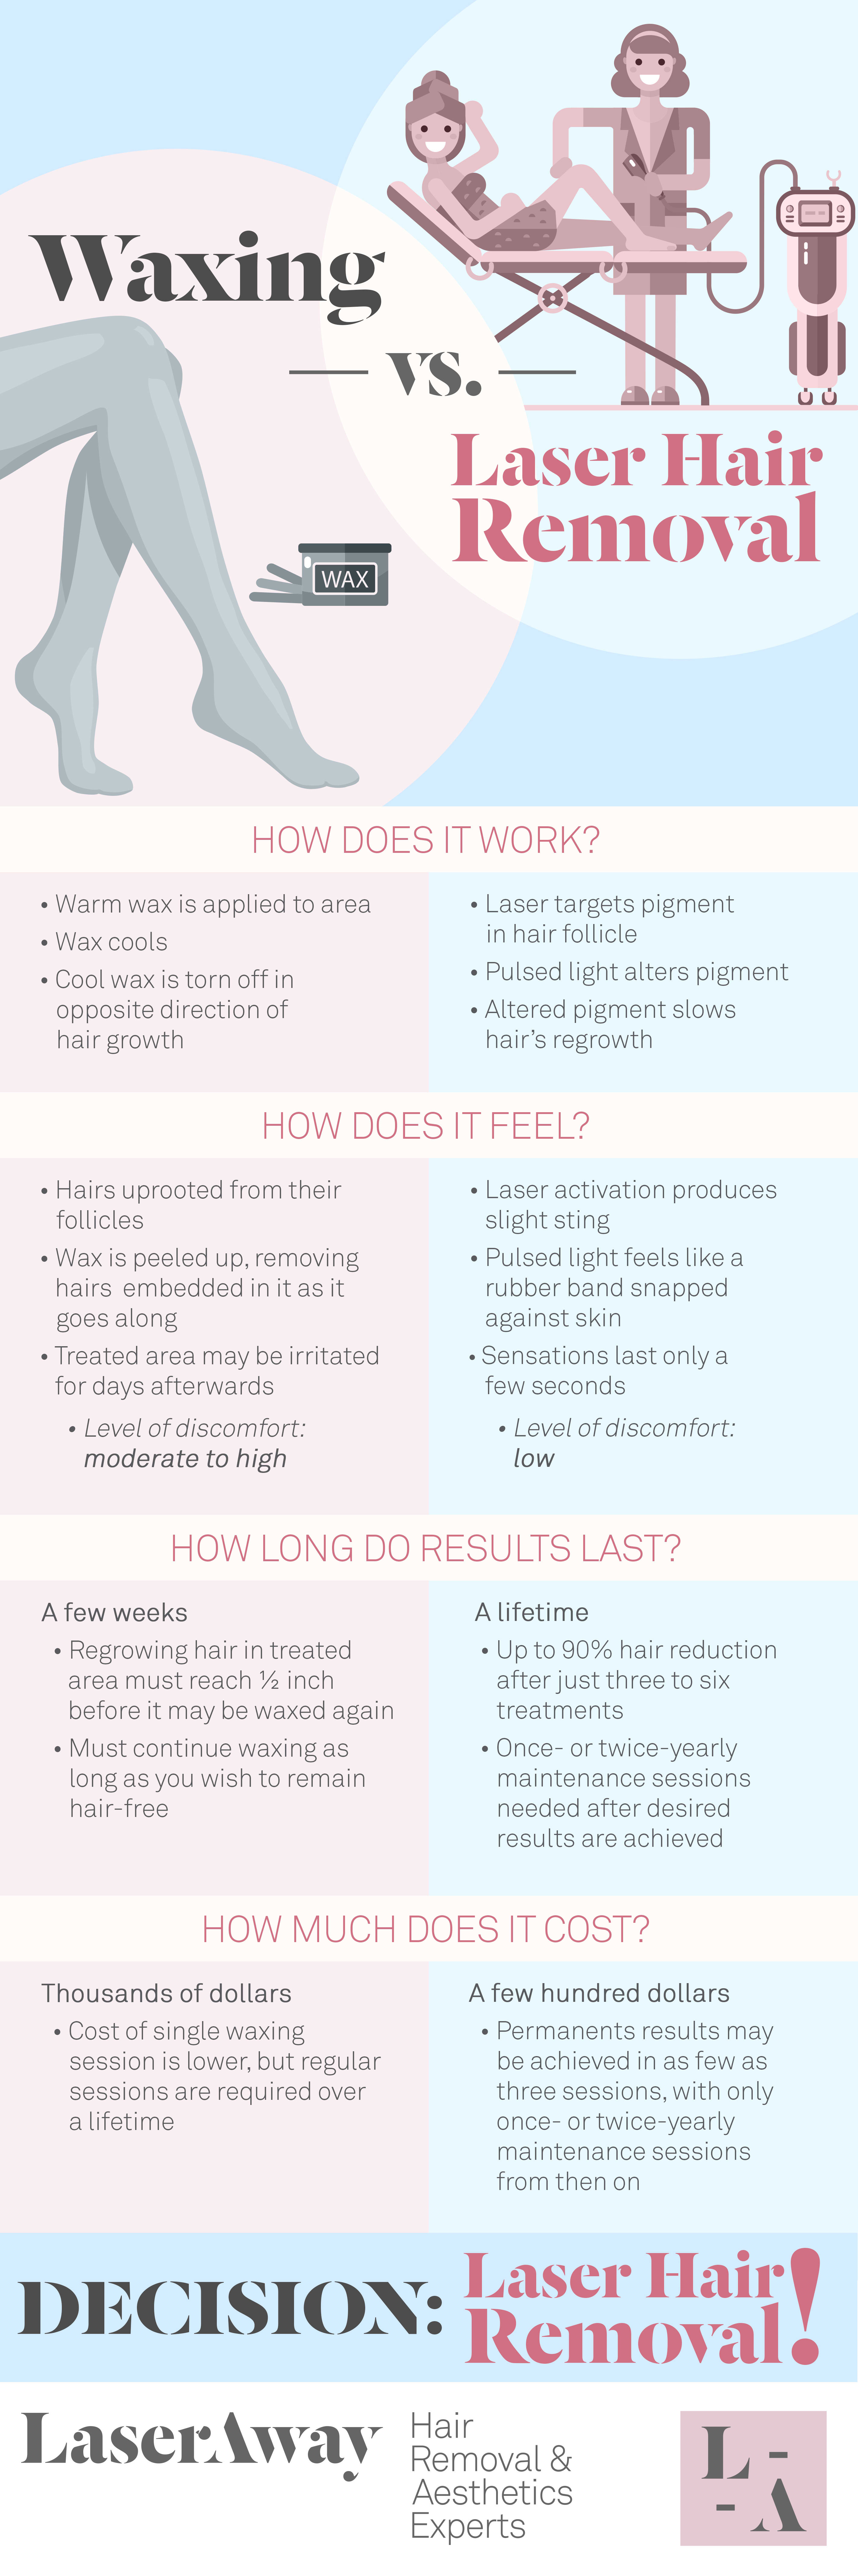 Laser away article image for Waxing vs. Laser Hair Removal